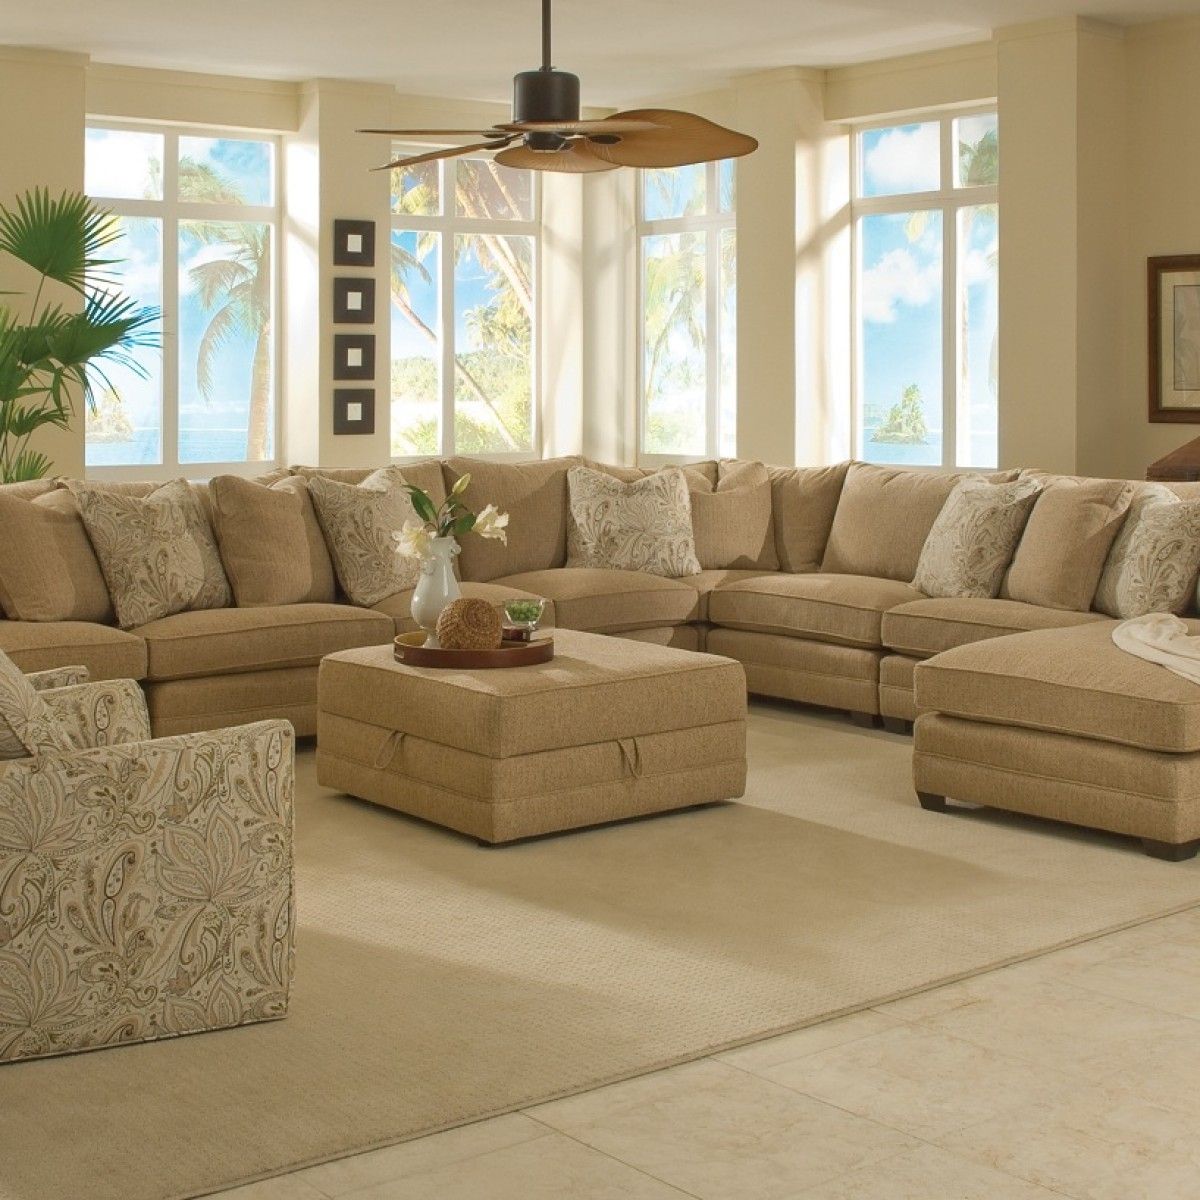 Living Room Sofas: Make Your Home Relaxing And Inviting